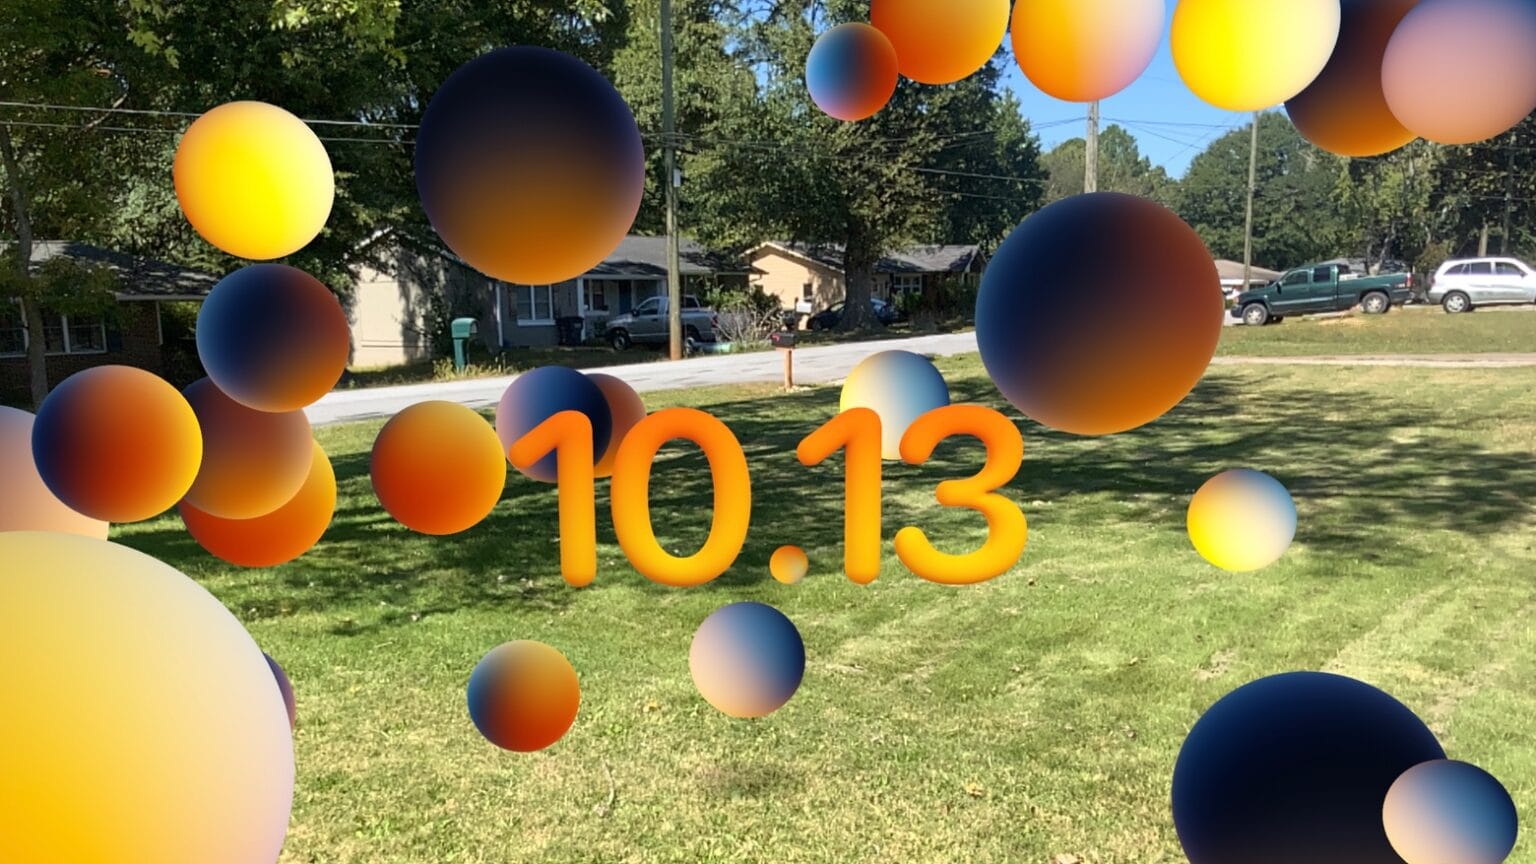 The invite to the Apple October event 2020 offers an augmented-reality easter egg.